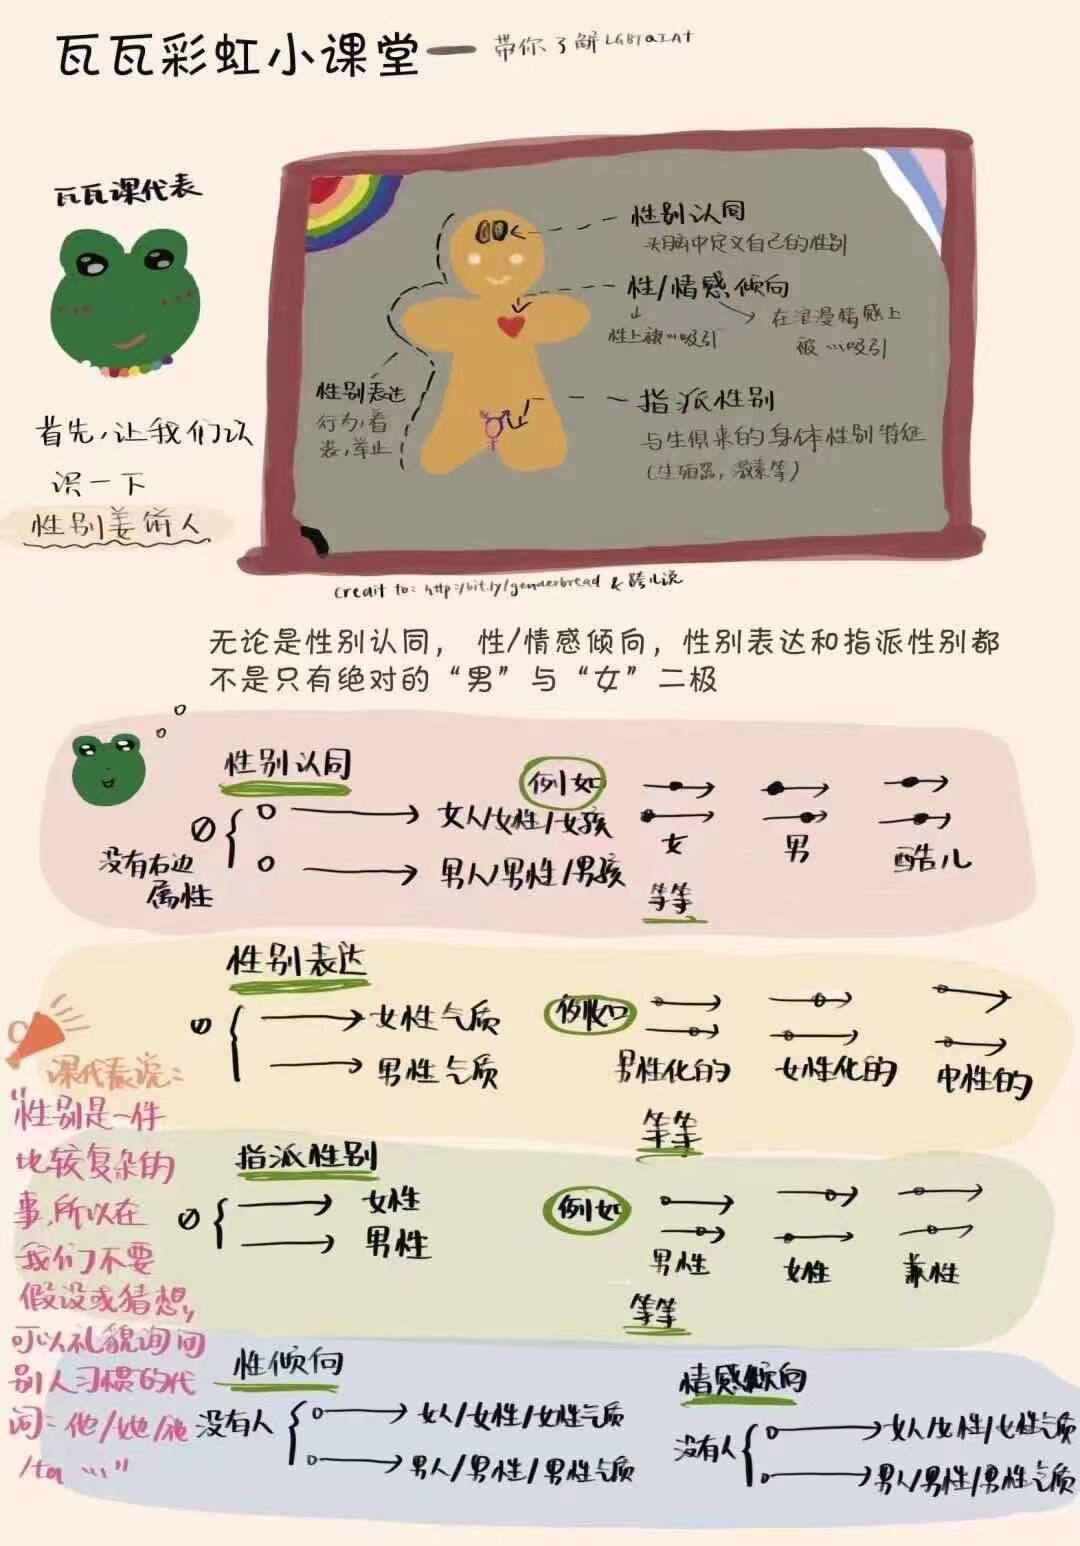 Jiyoung: In lieu of any personal photos alongside this week's episode, here are some useful LGBTQIA resources in Chinese [1].